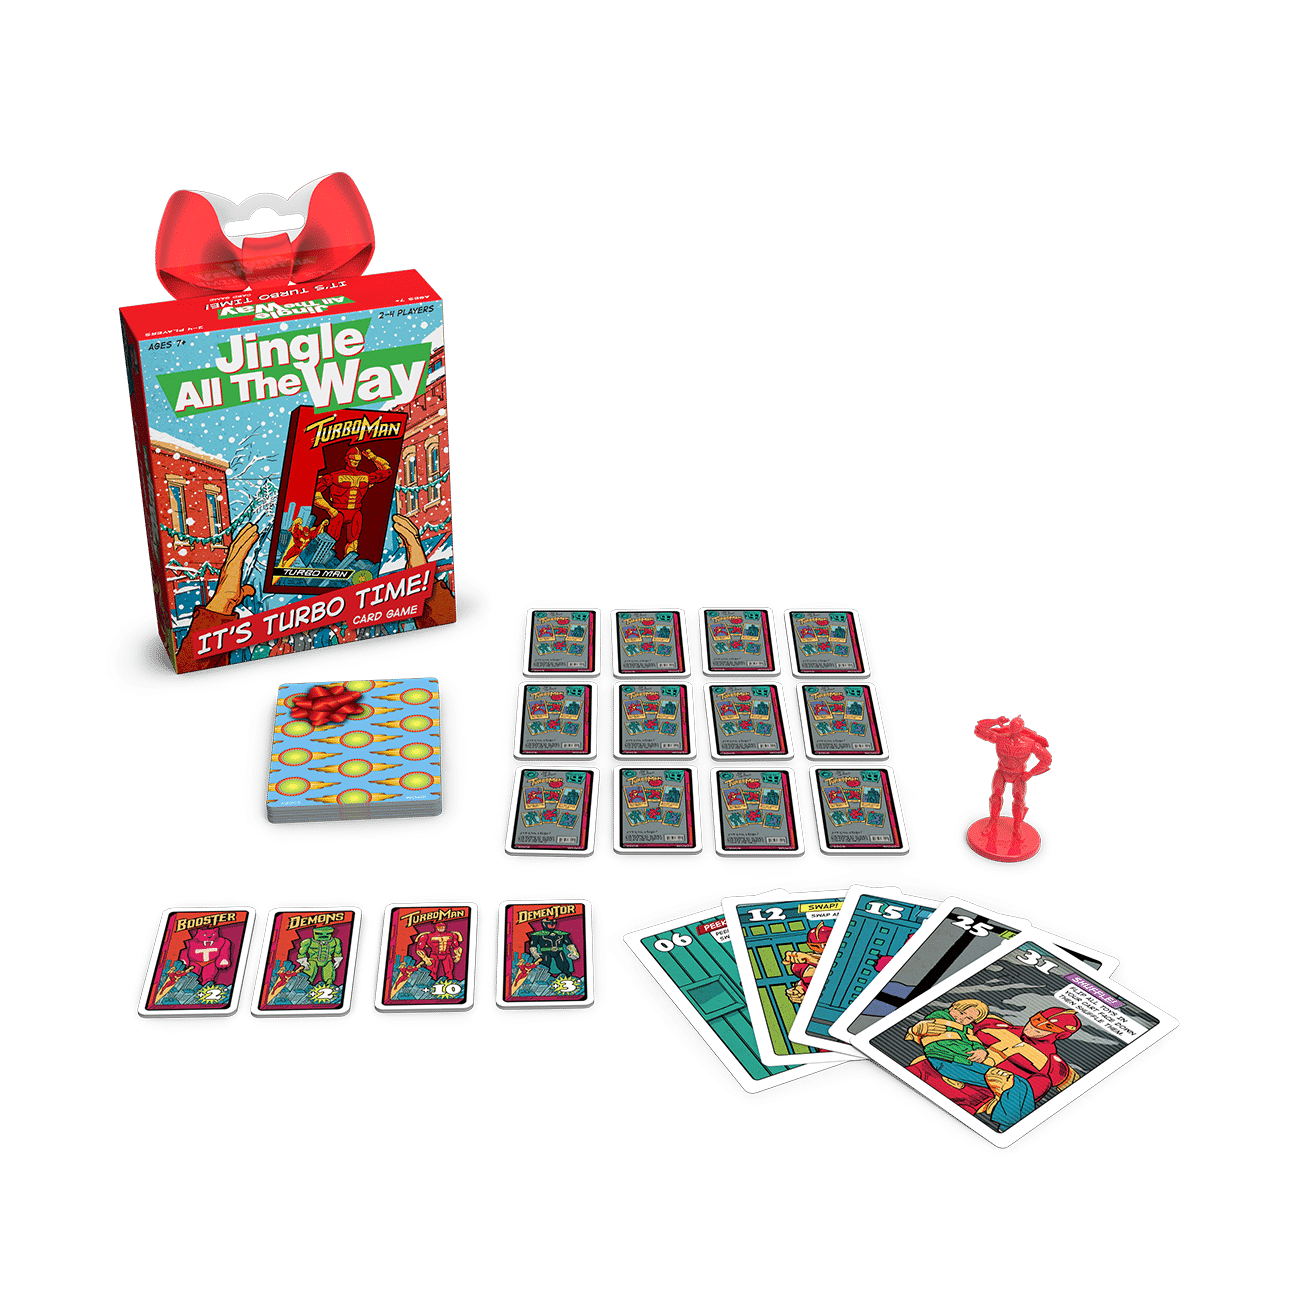 Jingle All the Way: It's Turbo Time! Card Game